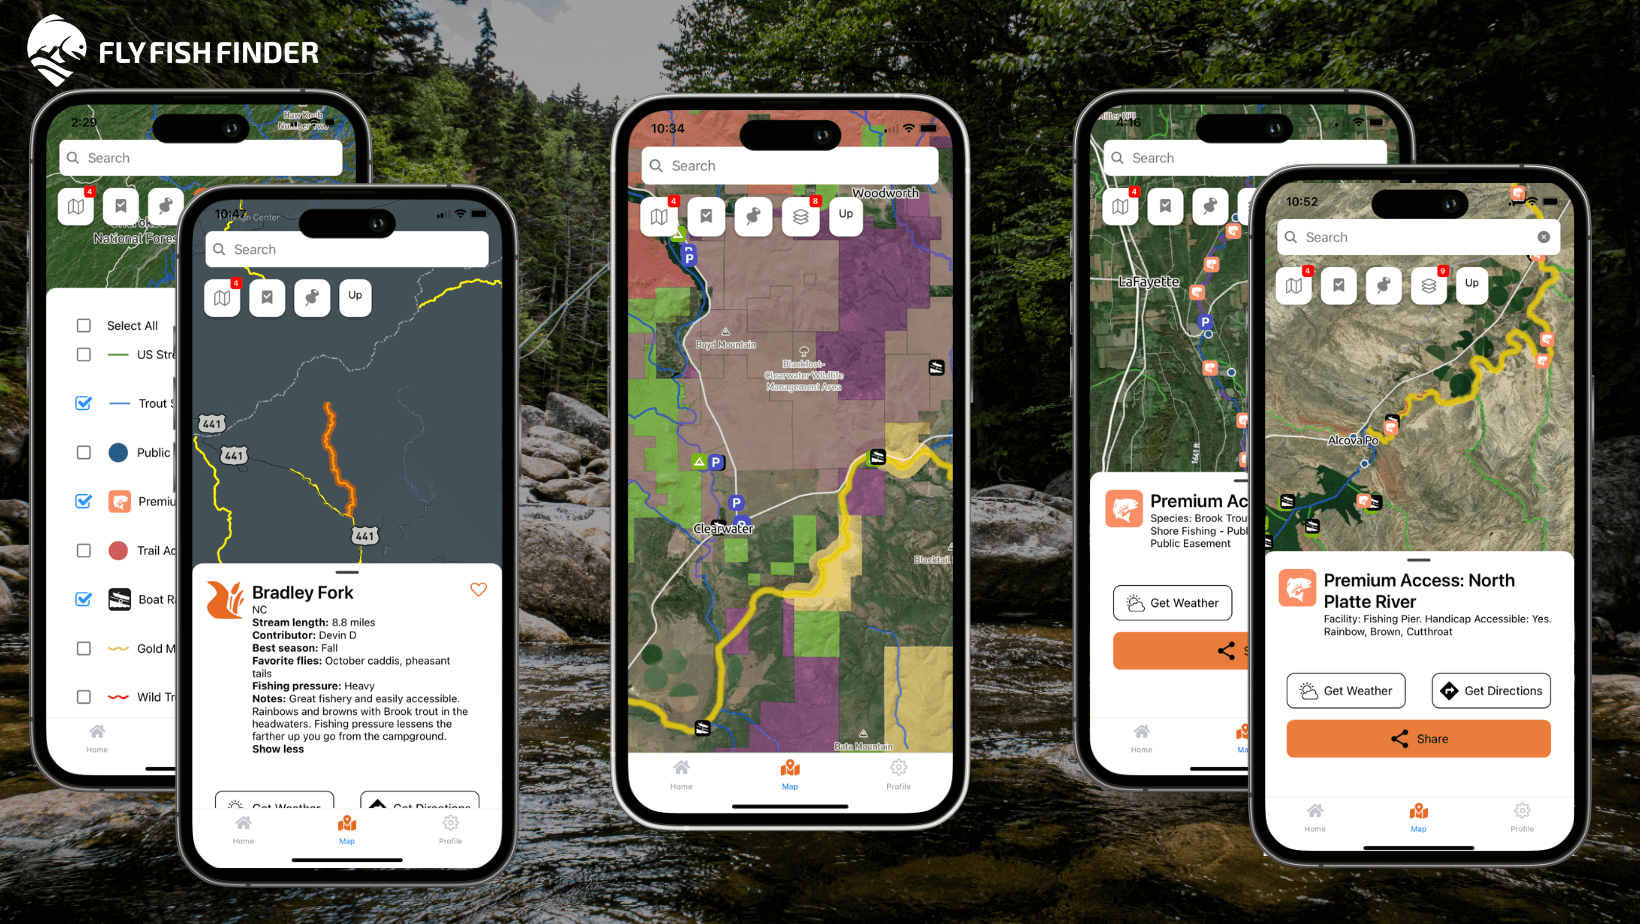 FlyFishFinder - app screen visuals showing the mapping tools for public lands, premium fishing access areas and more